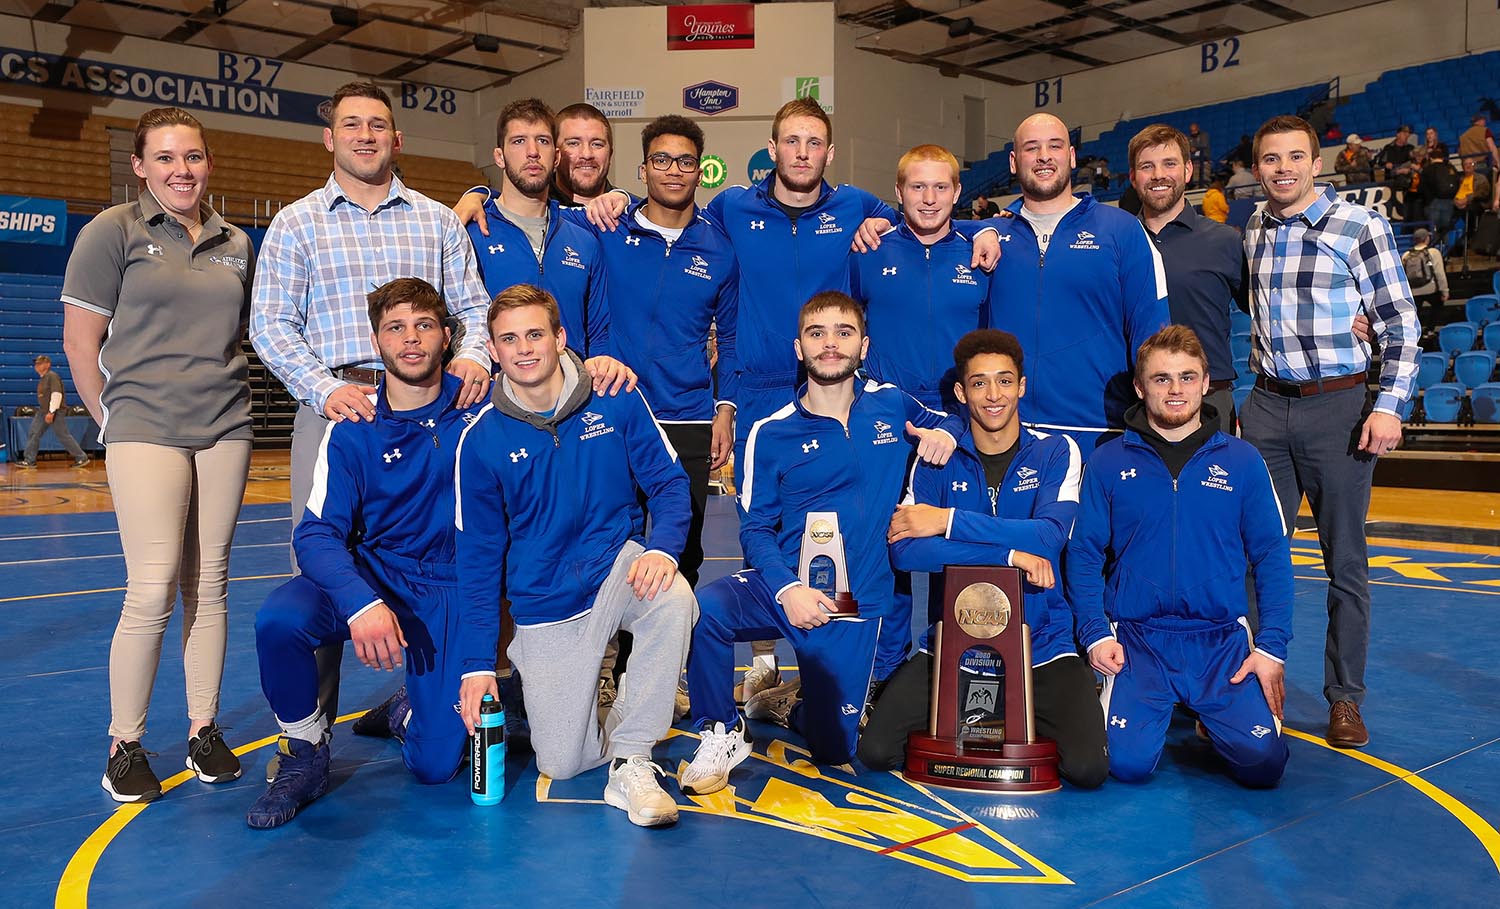 The UNK wrestling team poses for a photo Feb. 29 after winning the NCAA Super Regional VI Championships at UNK’s Health and Sports Center. Redshirt senior Jarrod Hinrichs, back row, third from right, said his coaches and teammates have been his second family over the past five years.